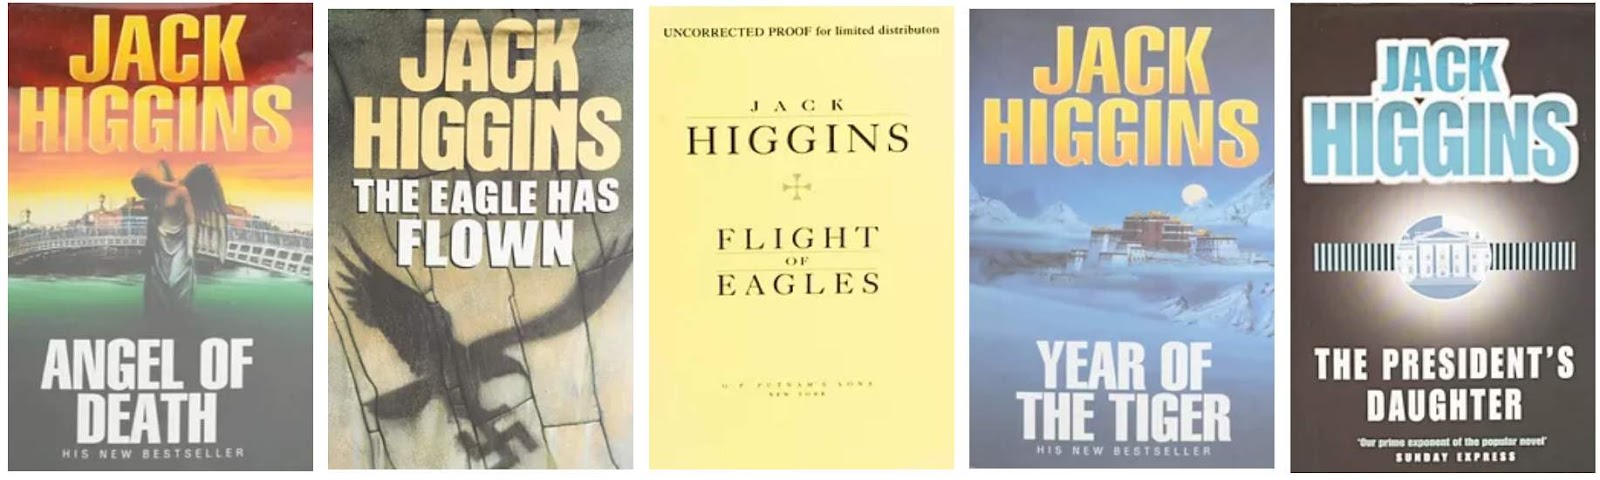 Jack Higgins RIP: 5 Quirky Facts About ‘The Eagle Has Landed’ Spy Author